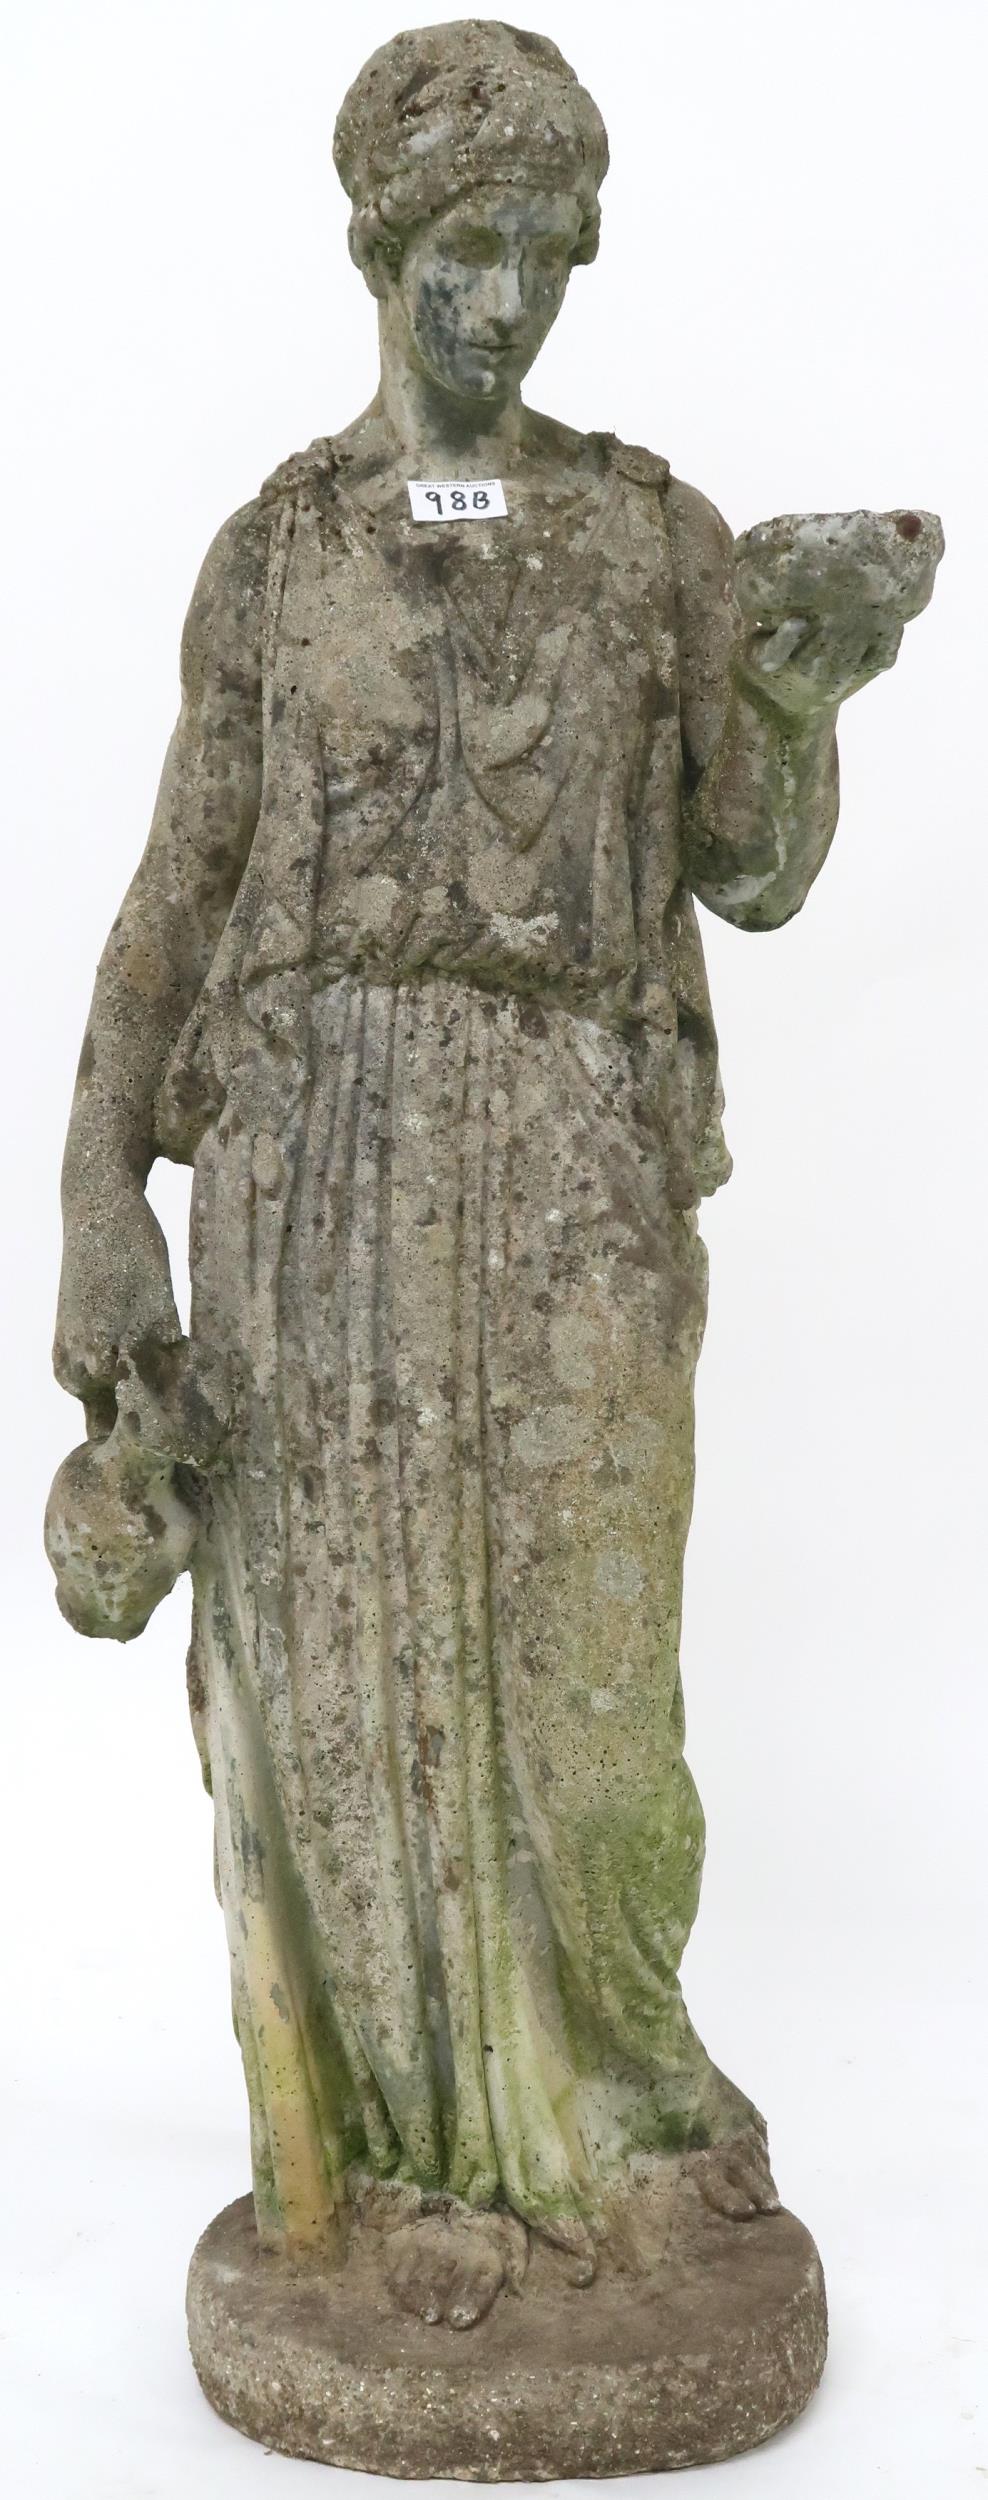 A 20th century reconstituted stone garden statue of a classical lady in toga carrying jug and